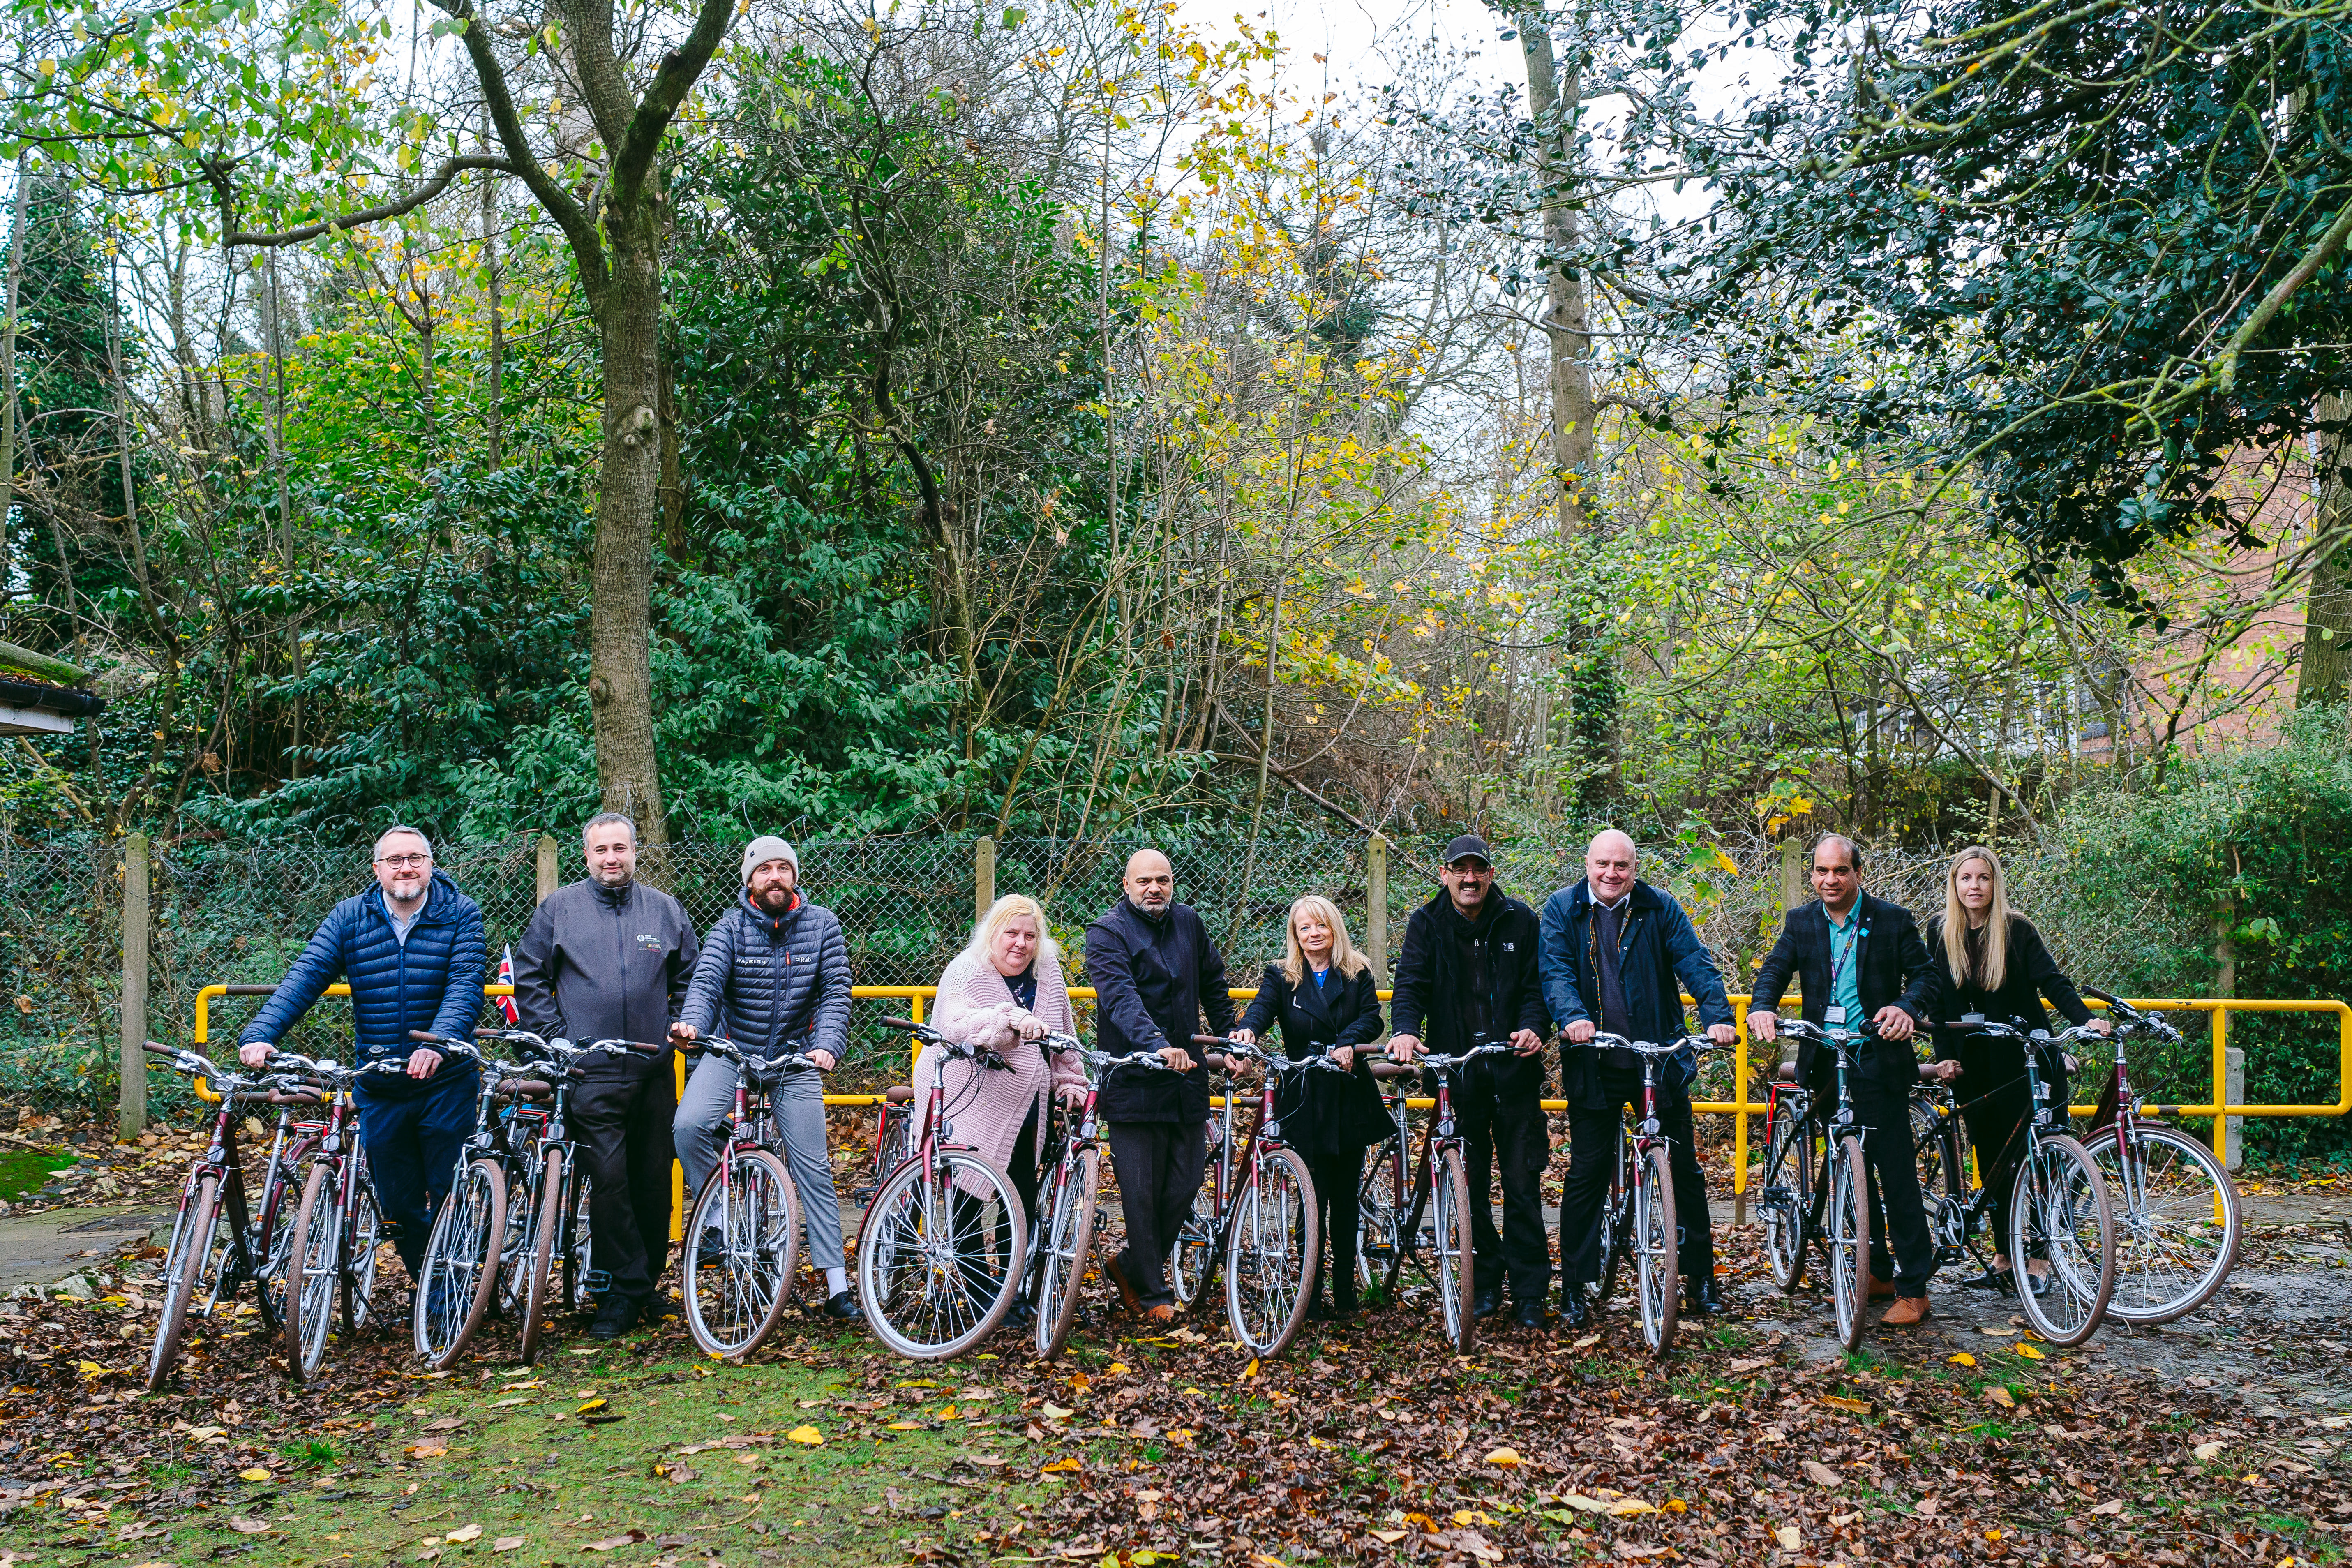 Agenda 21 volunteers,  cycling group representatives and Walsall council showing the new bikes